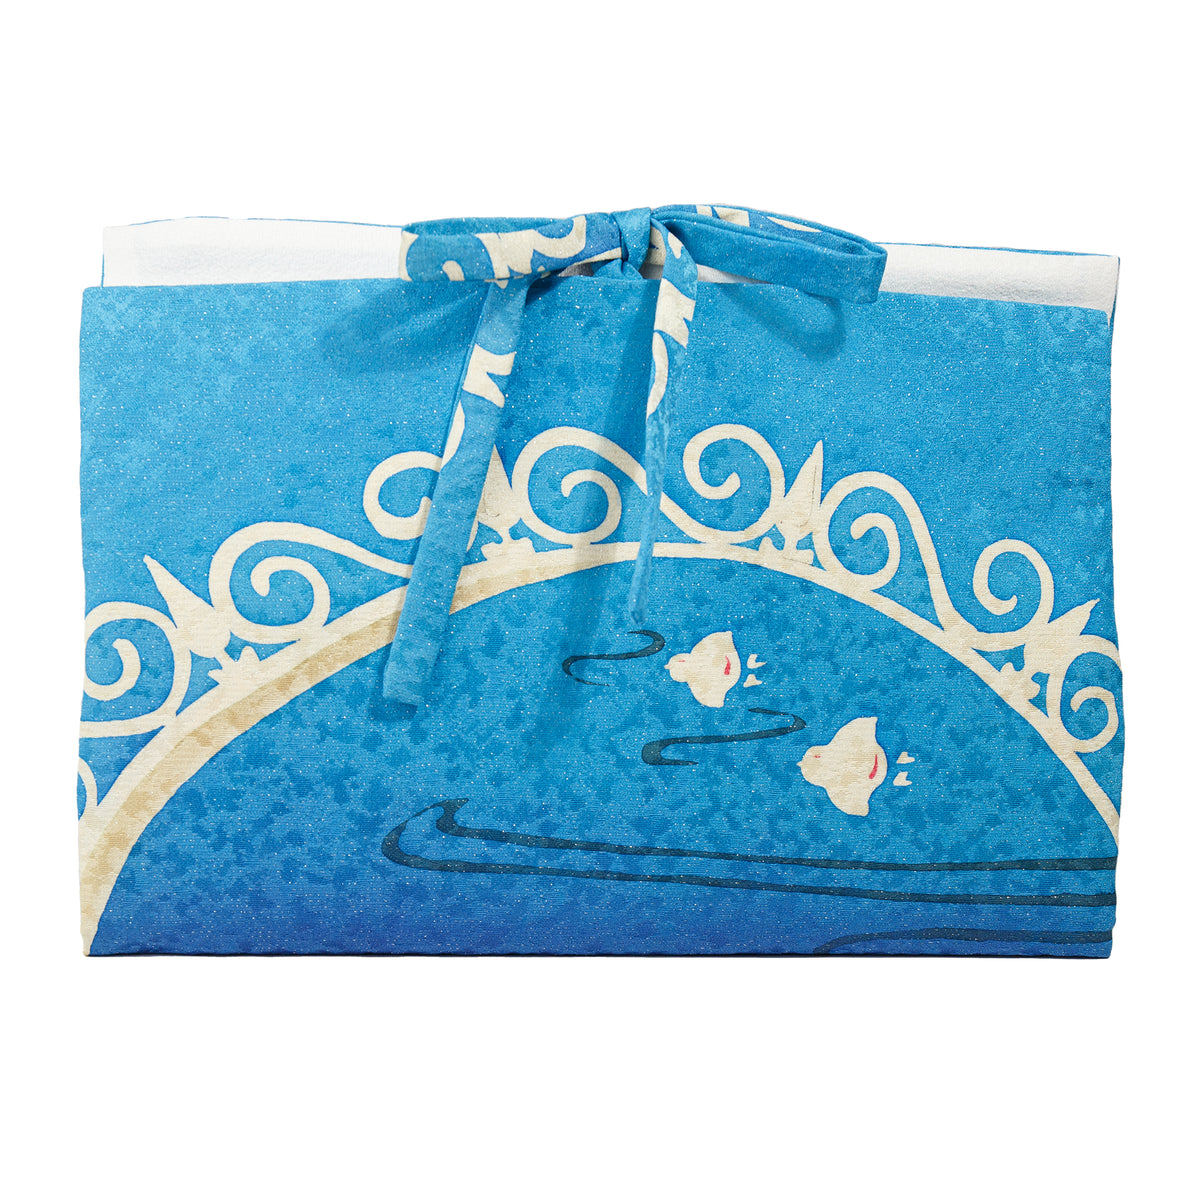 Primary image of Large Lingerie Pouch - Blue